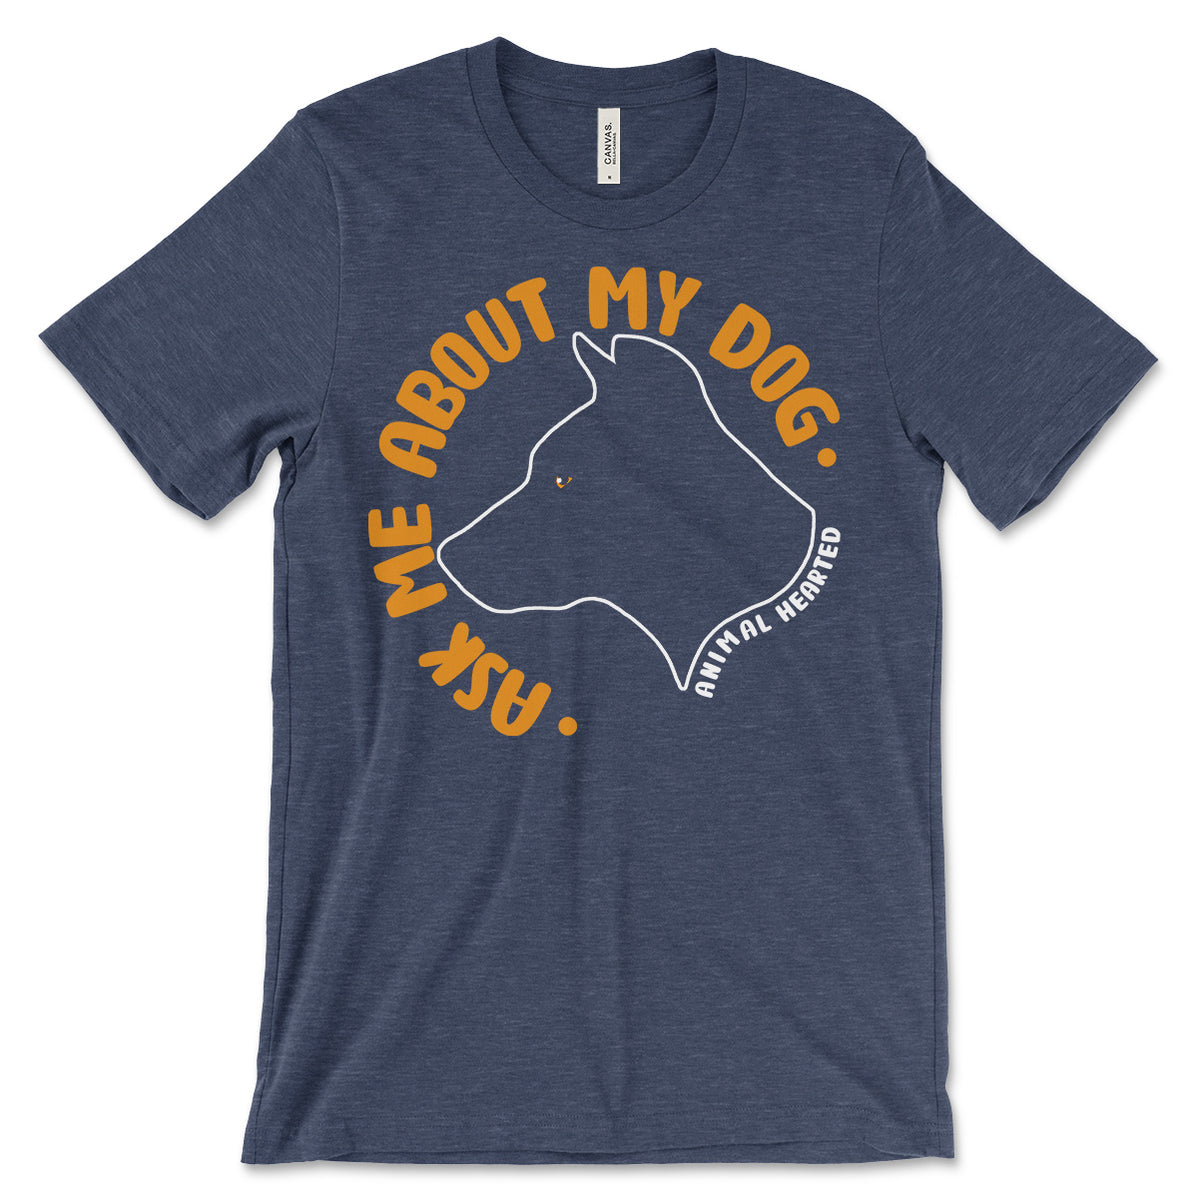 Dog Shirts for Humans | Animal Hearted Apparel